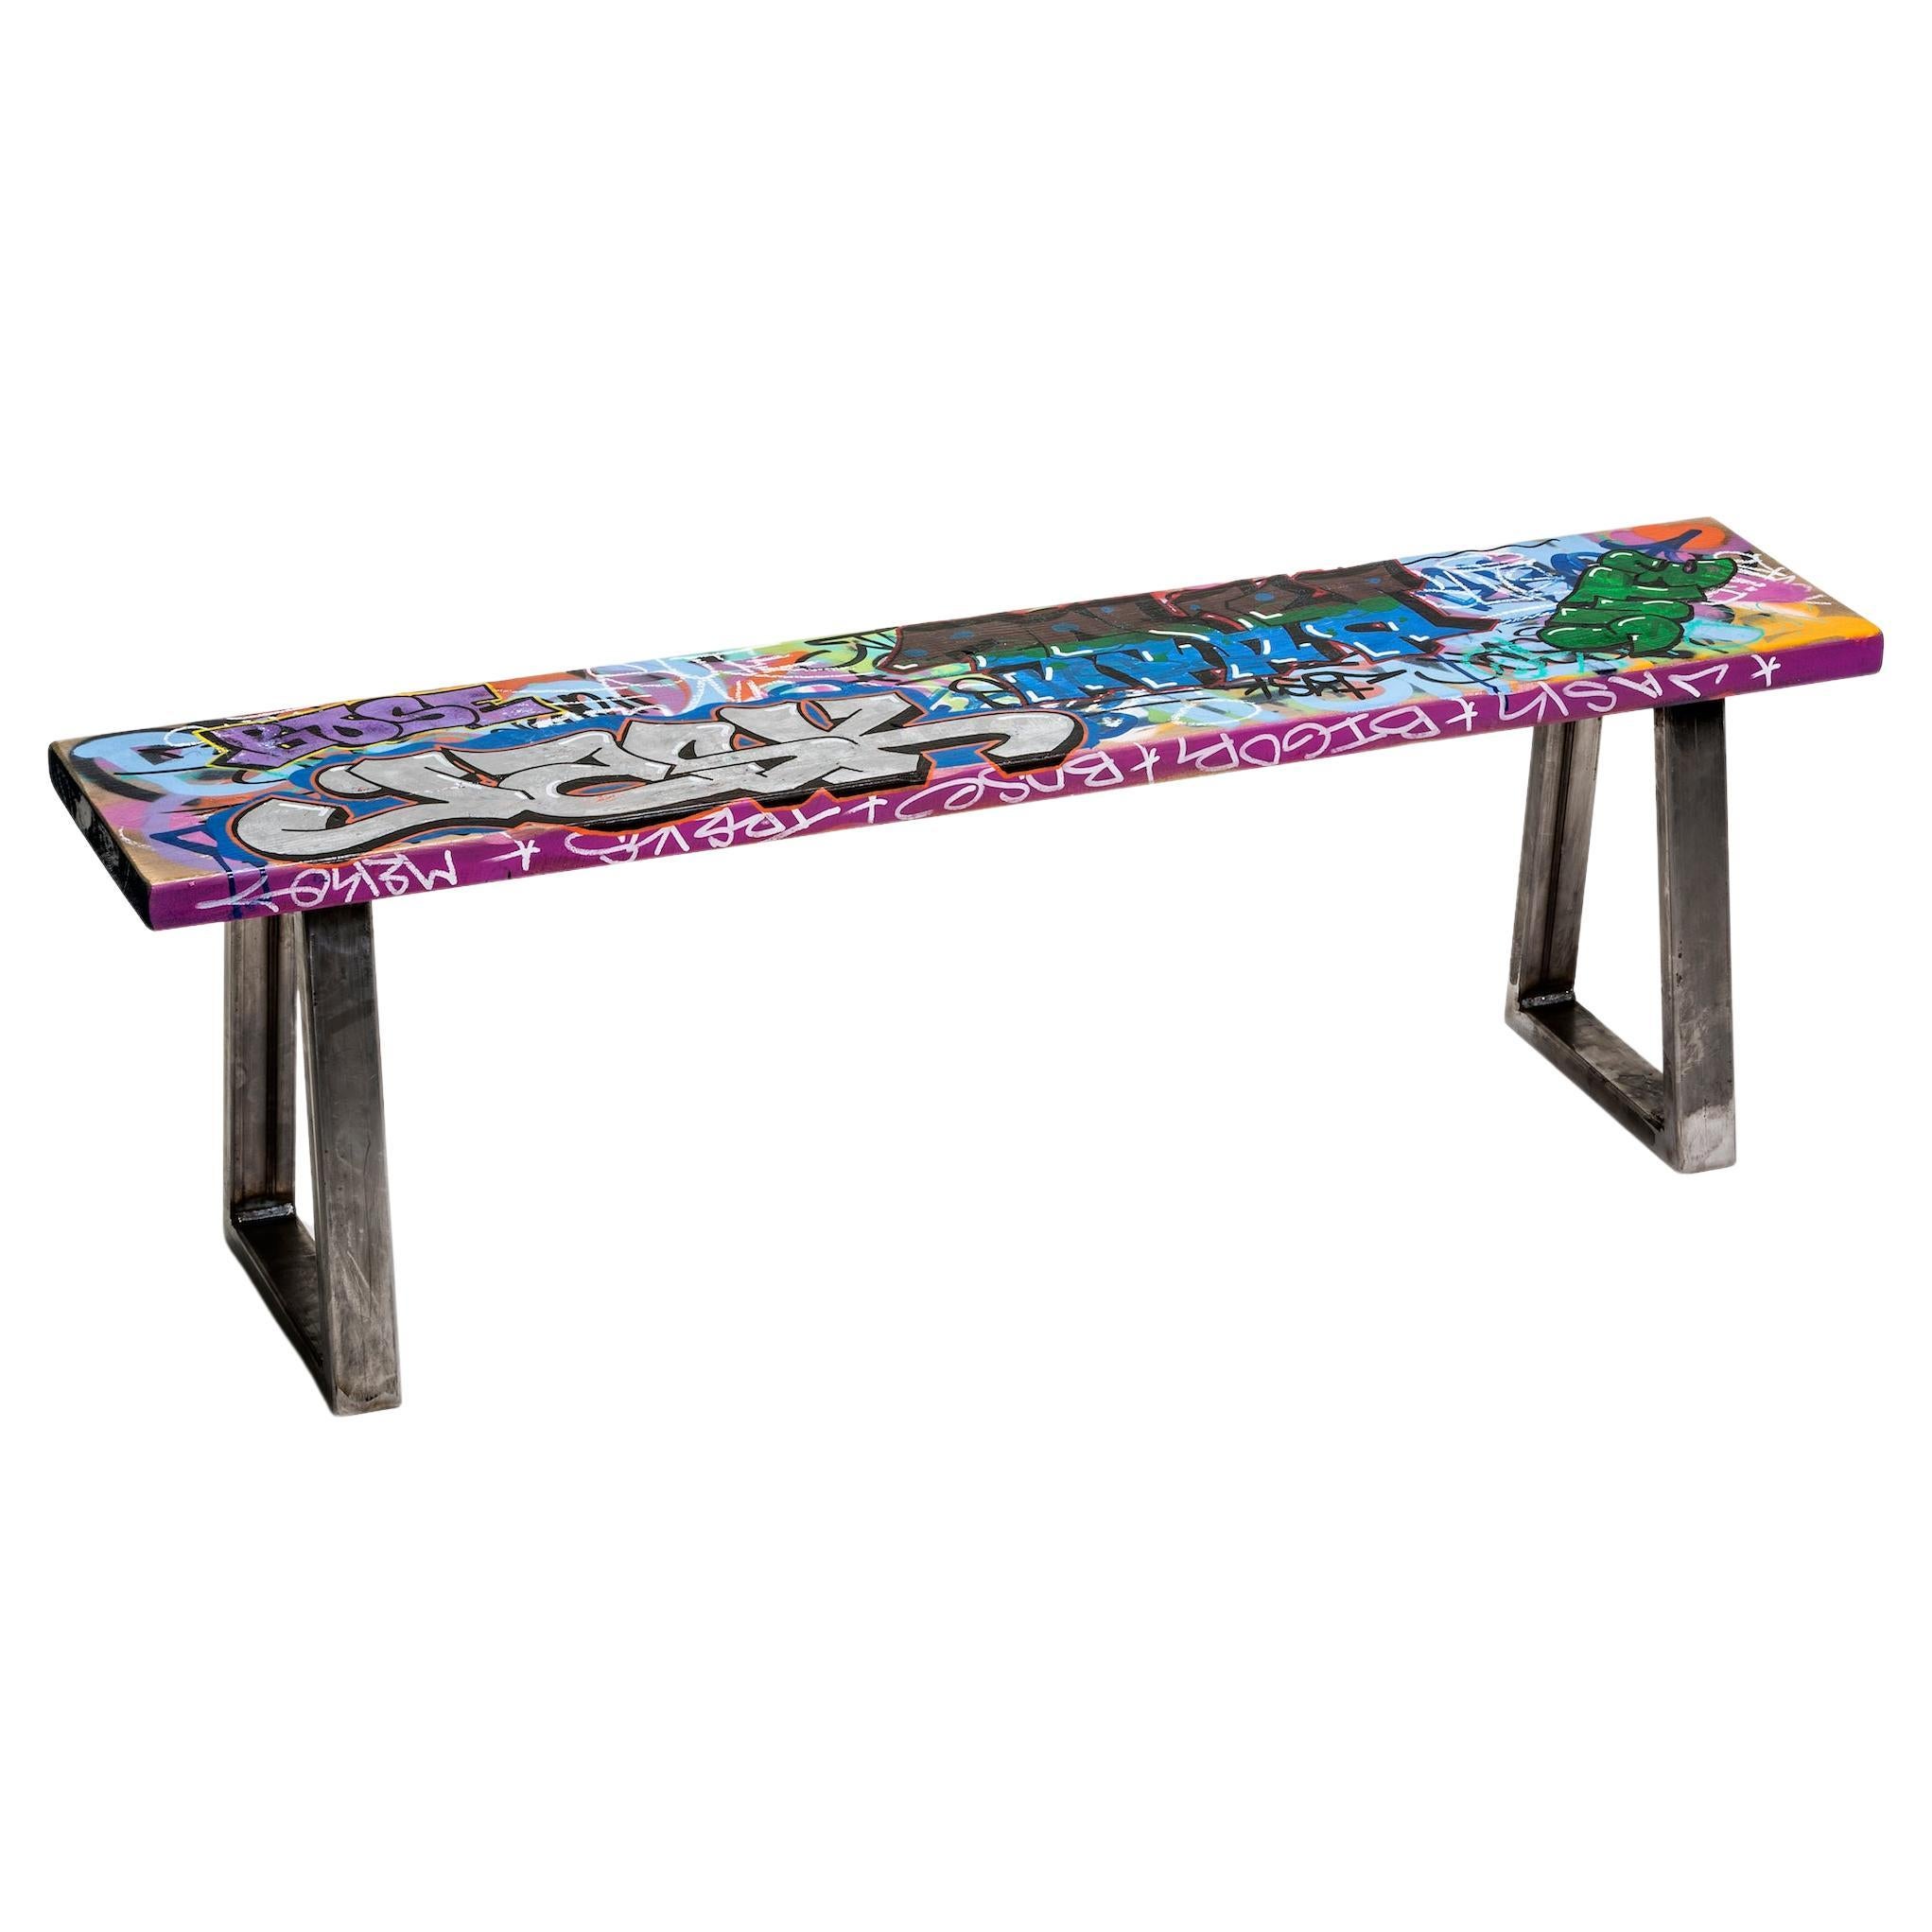 Small Colorful Graffiti Tagged Wood Bench "Rase The Roof" For Sale